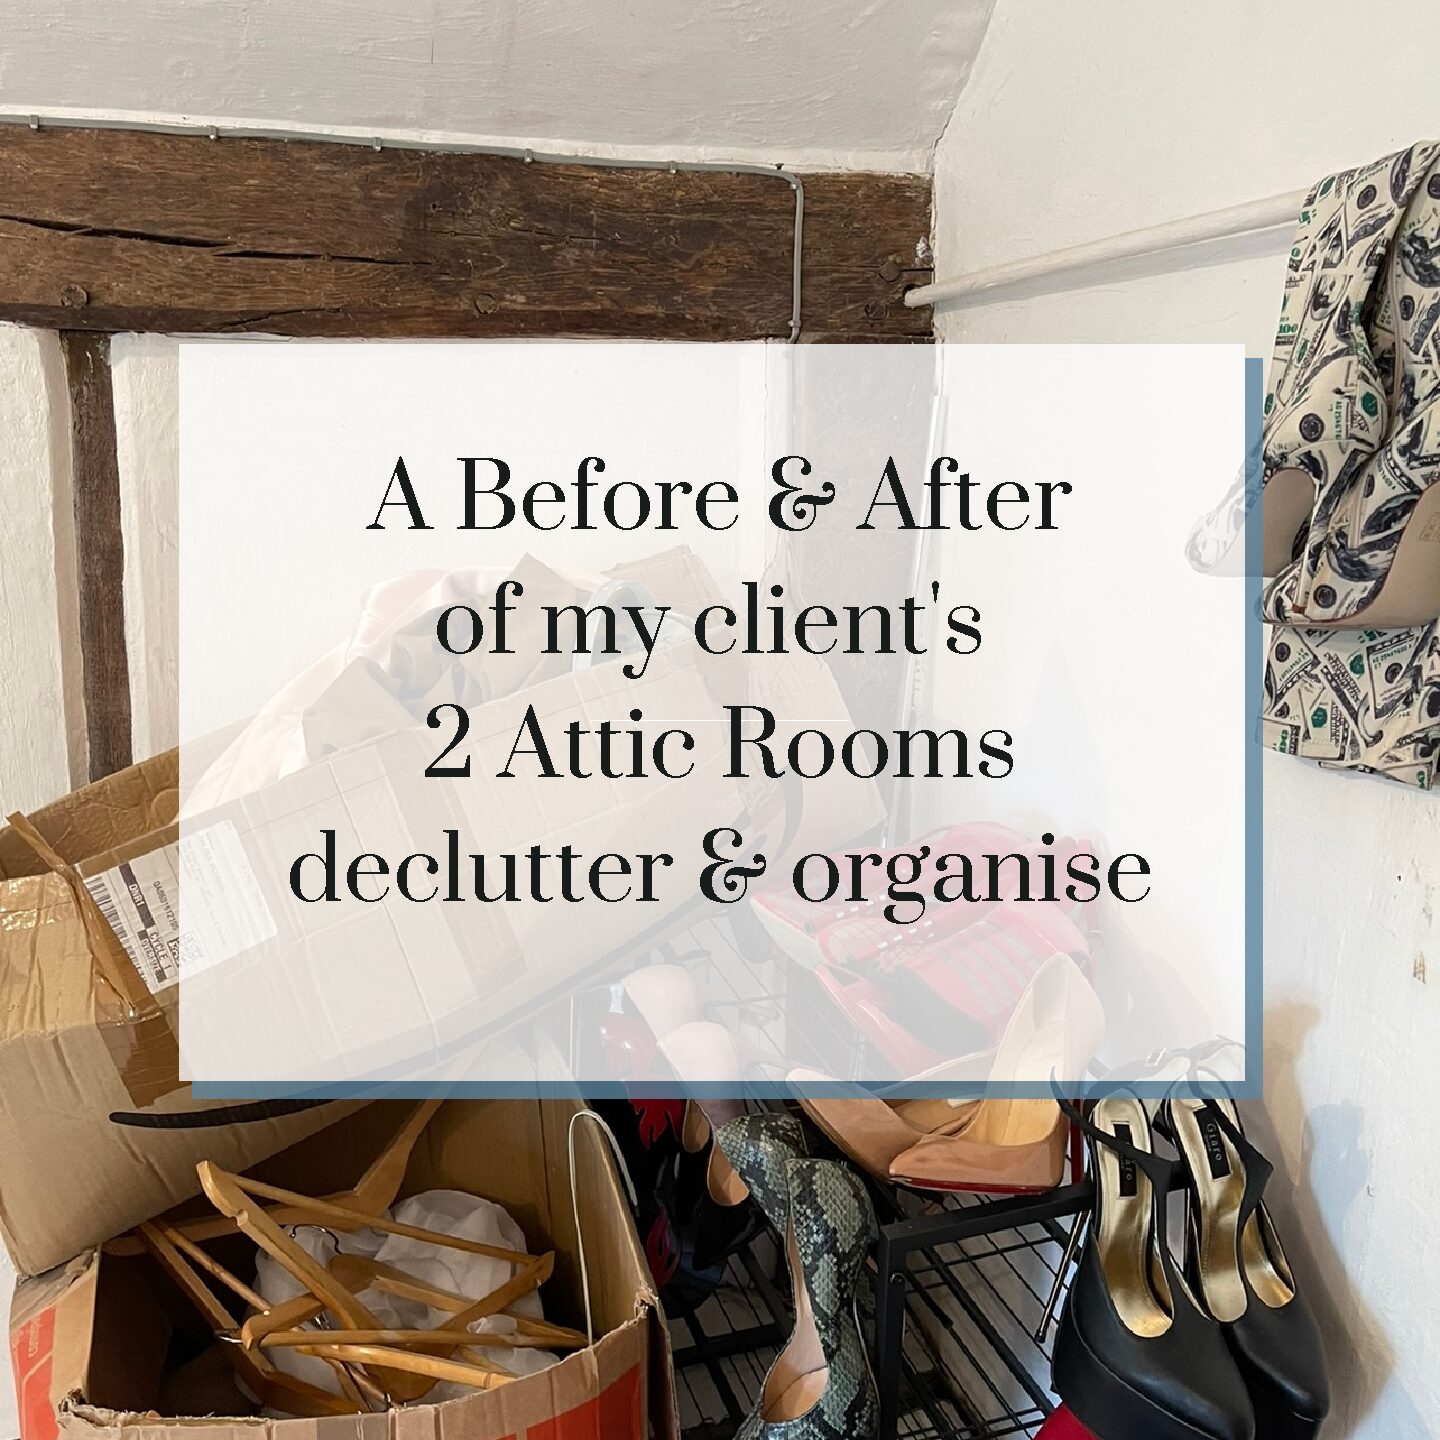 A Before & After of my client’s 2 room Attic Room declutter & organise!